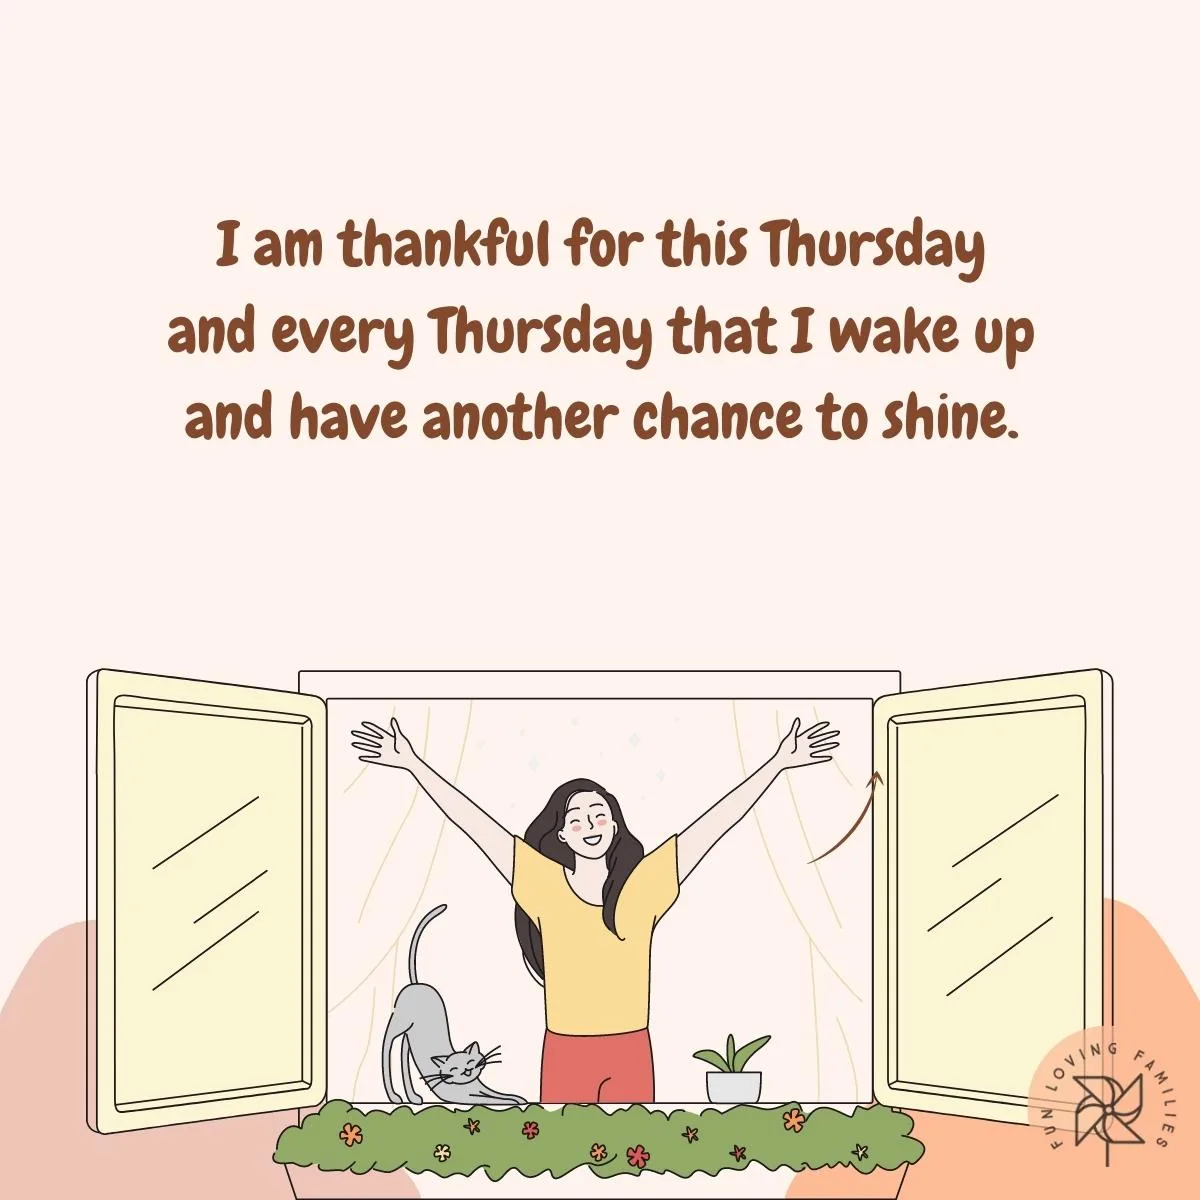 I am thankful for this Thursday affirmation